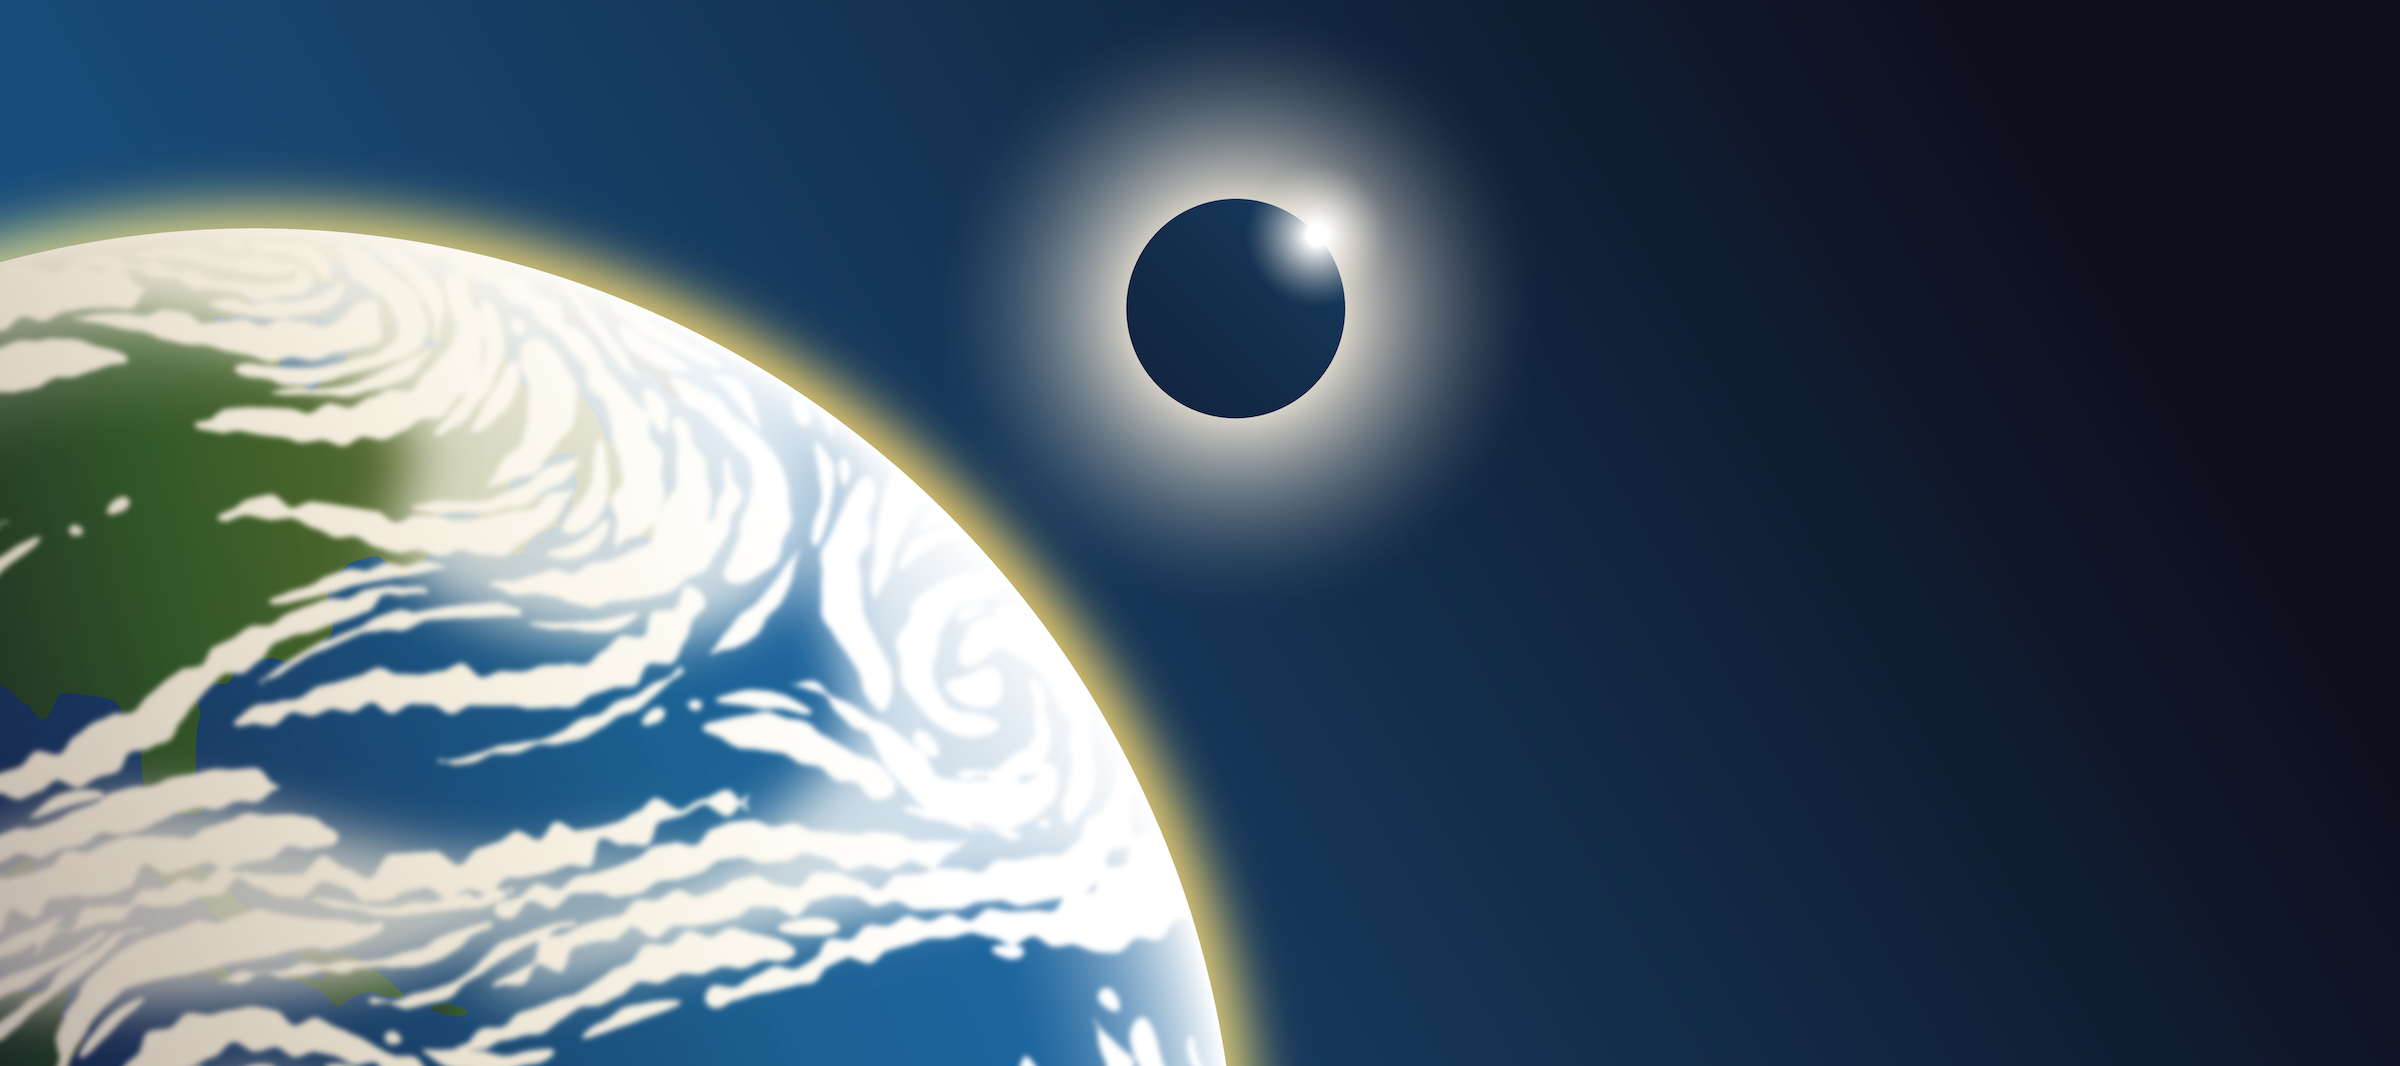 A drawing of the Earth with an eclipsed Sun next to it.